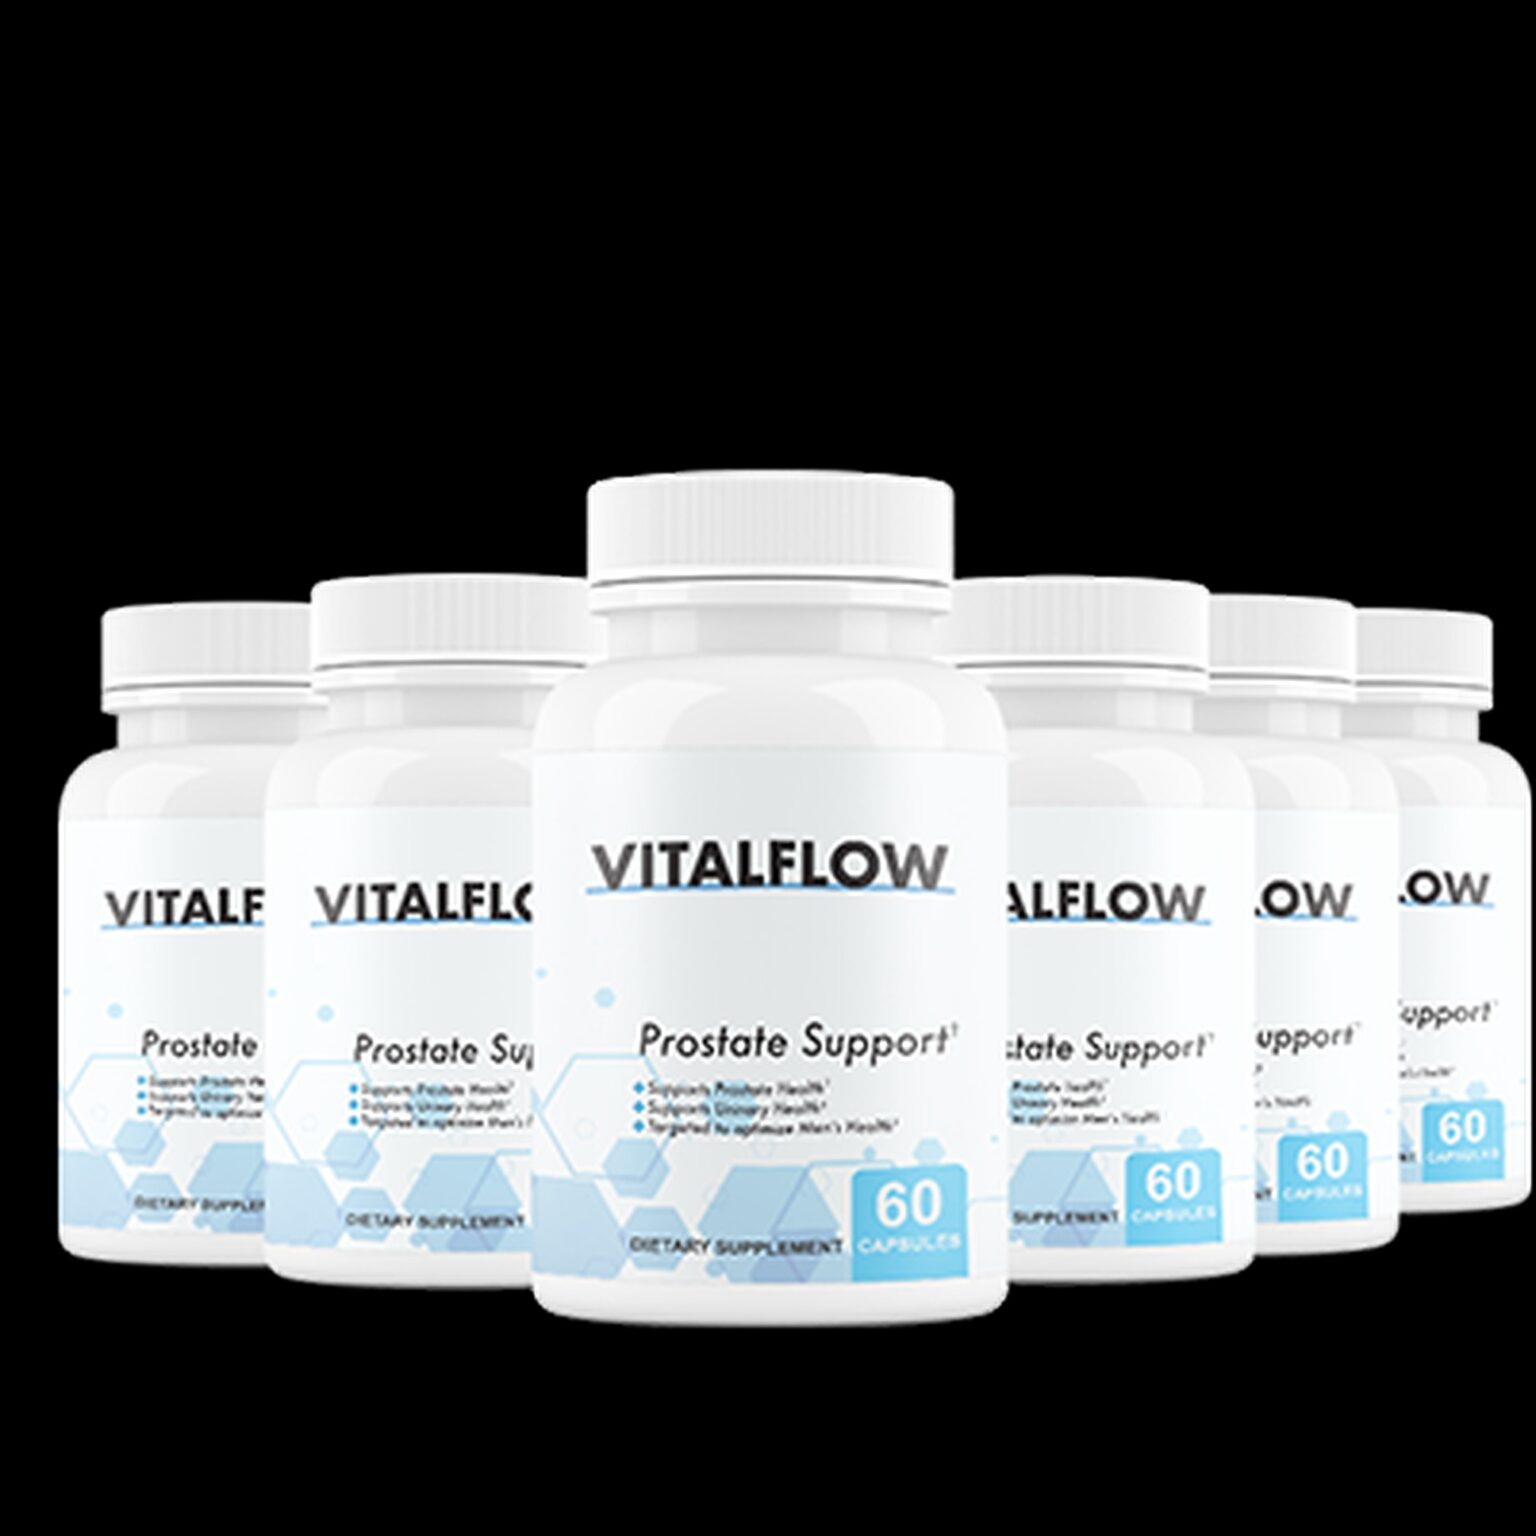 Given how popular Vitalflow is, a lot of customers want to know whether they can buy Vitalflow on Amazon or Walmart or GNC or eBay.